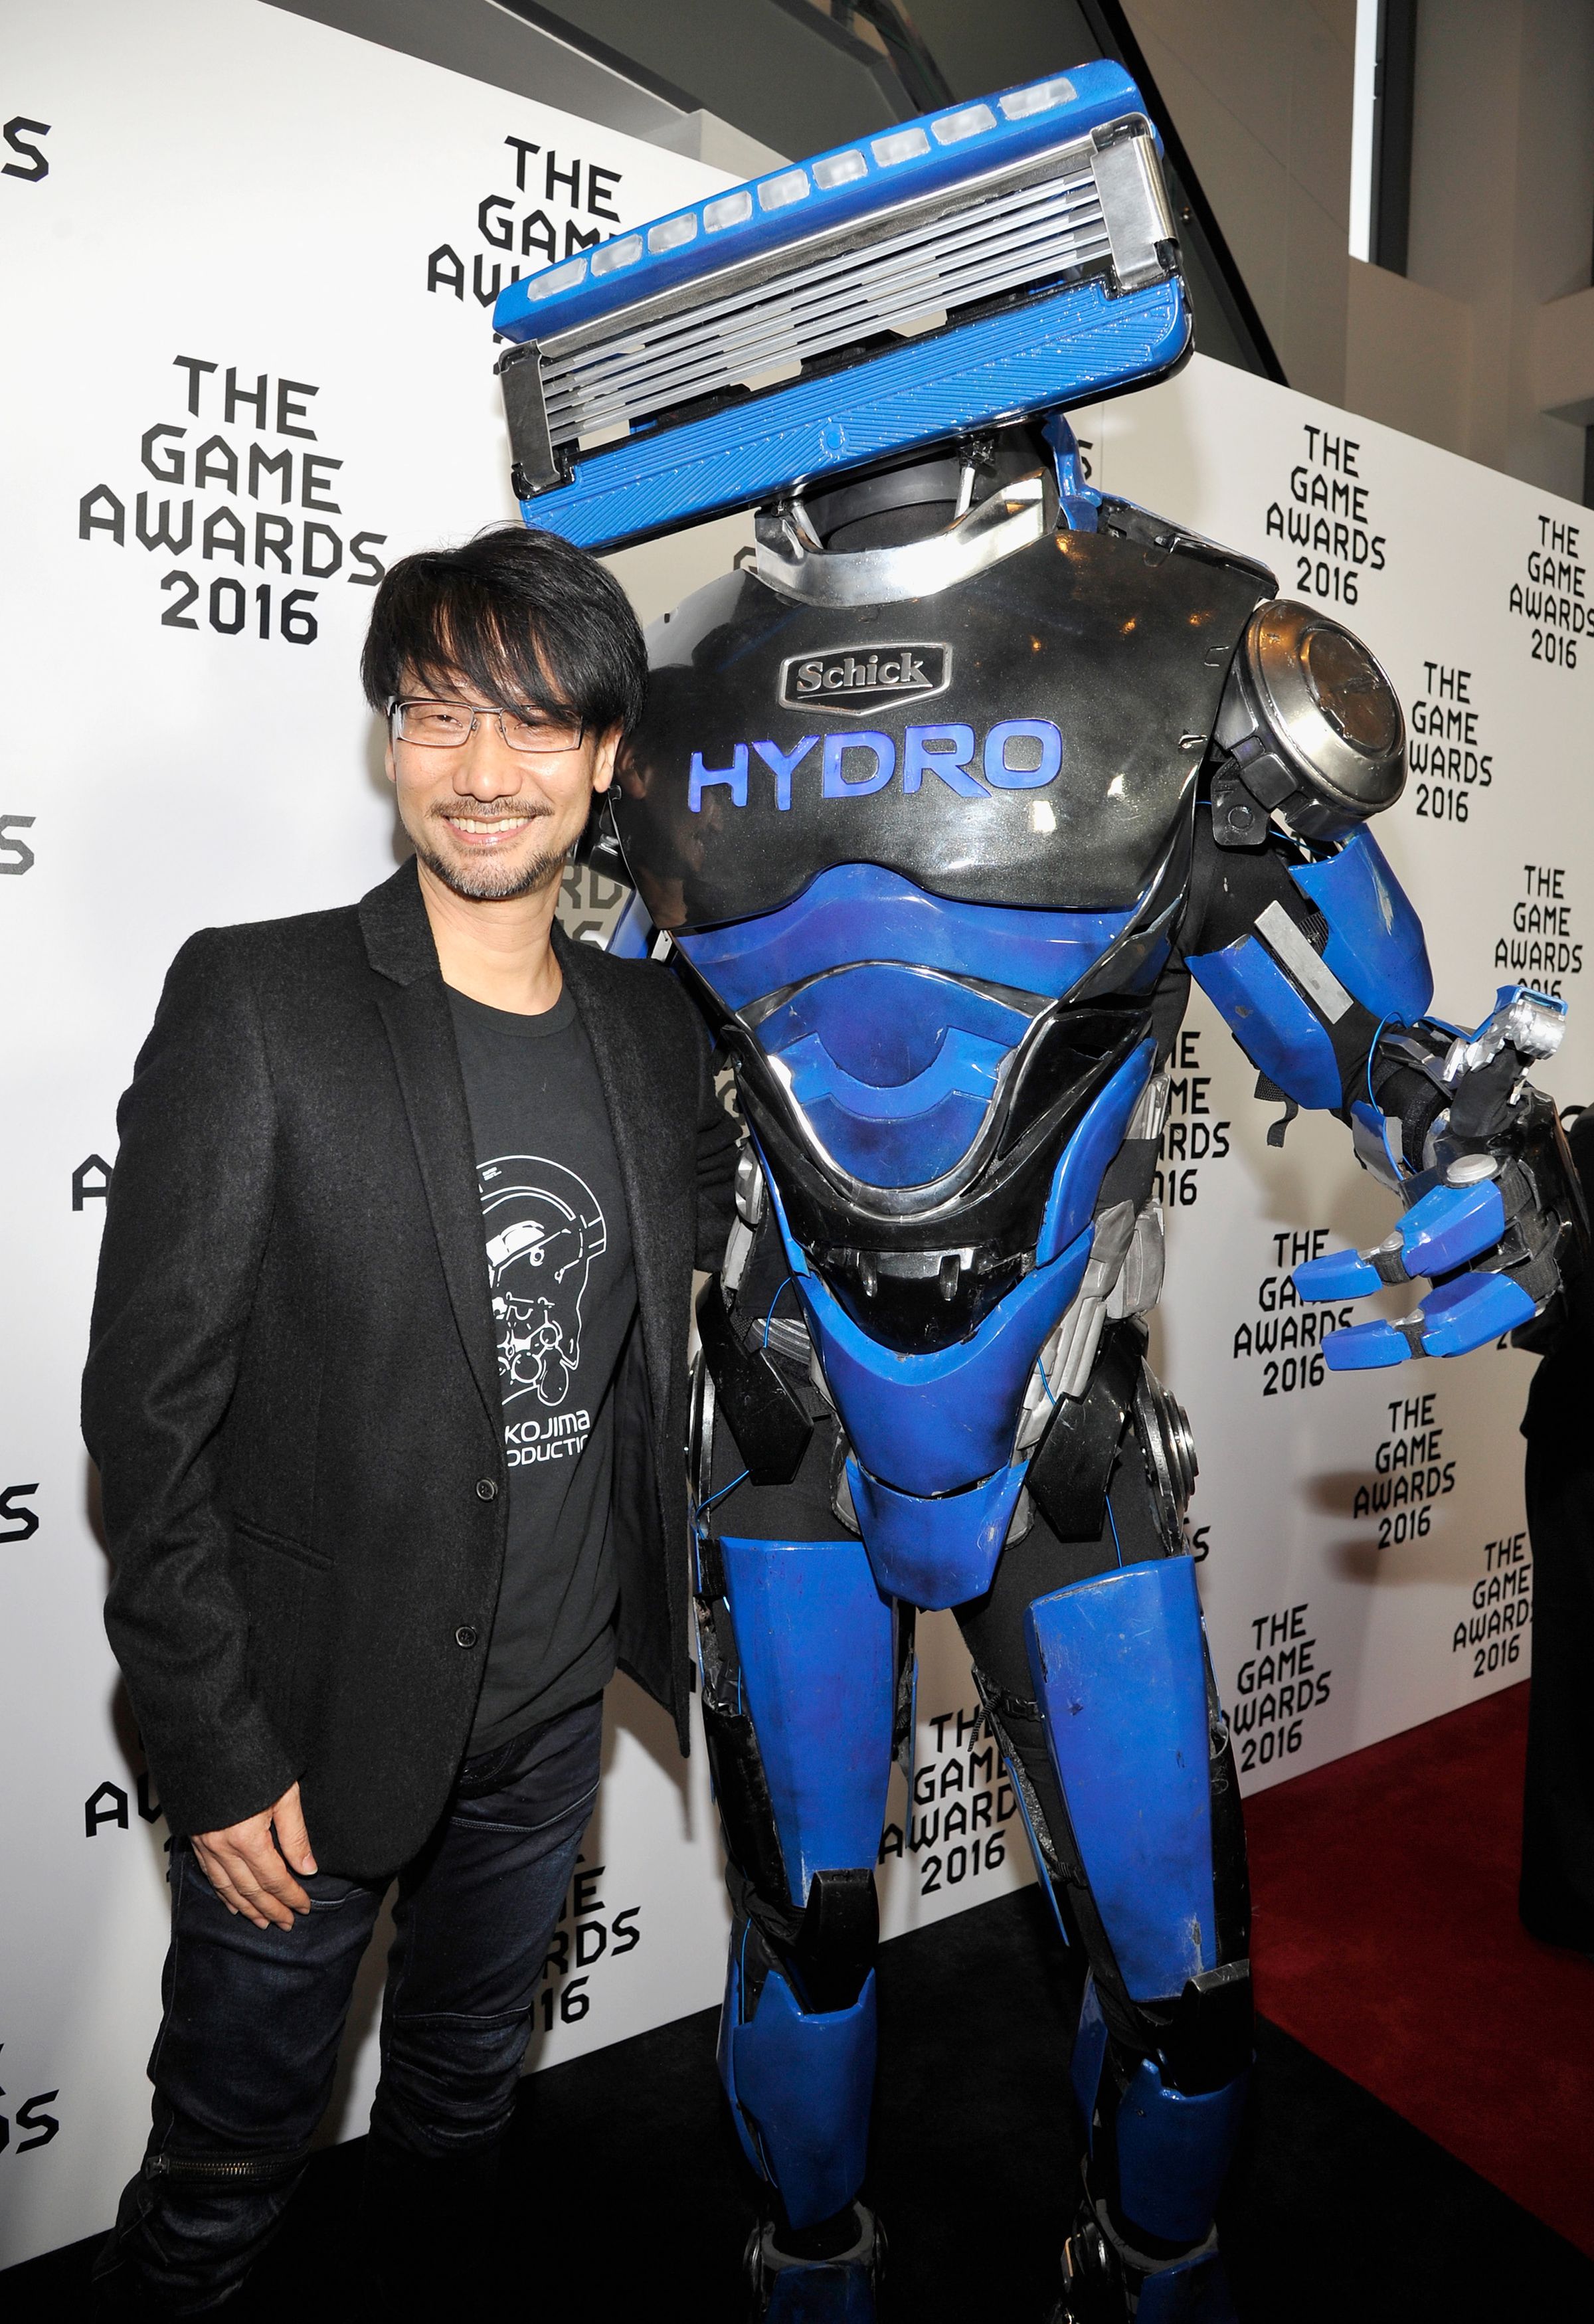 The Schick Hydrobot at the Game Awards 2016